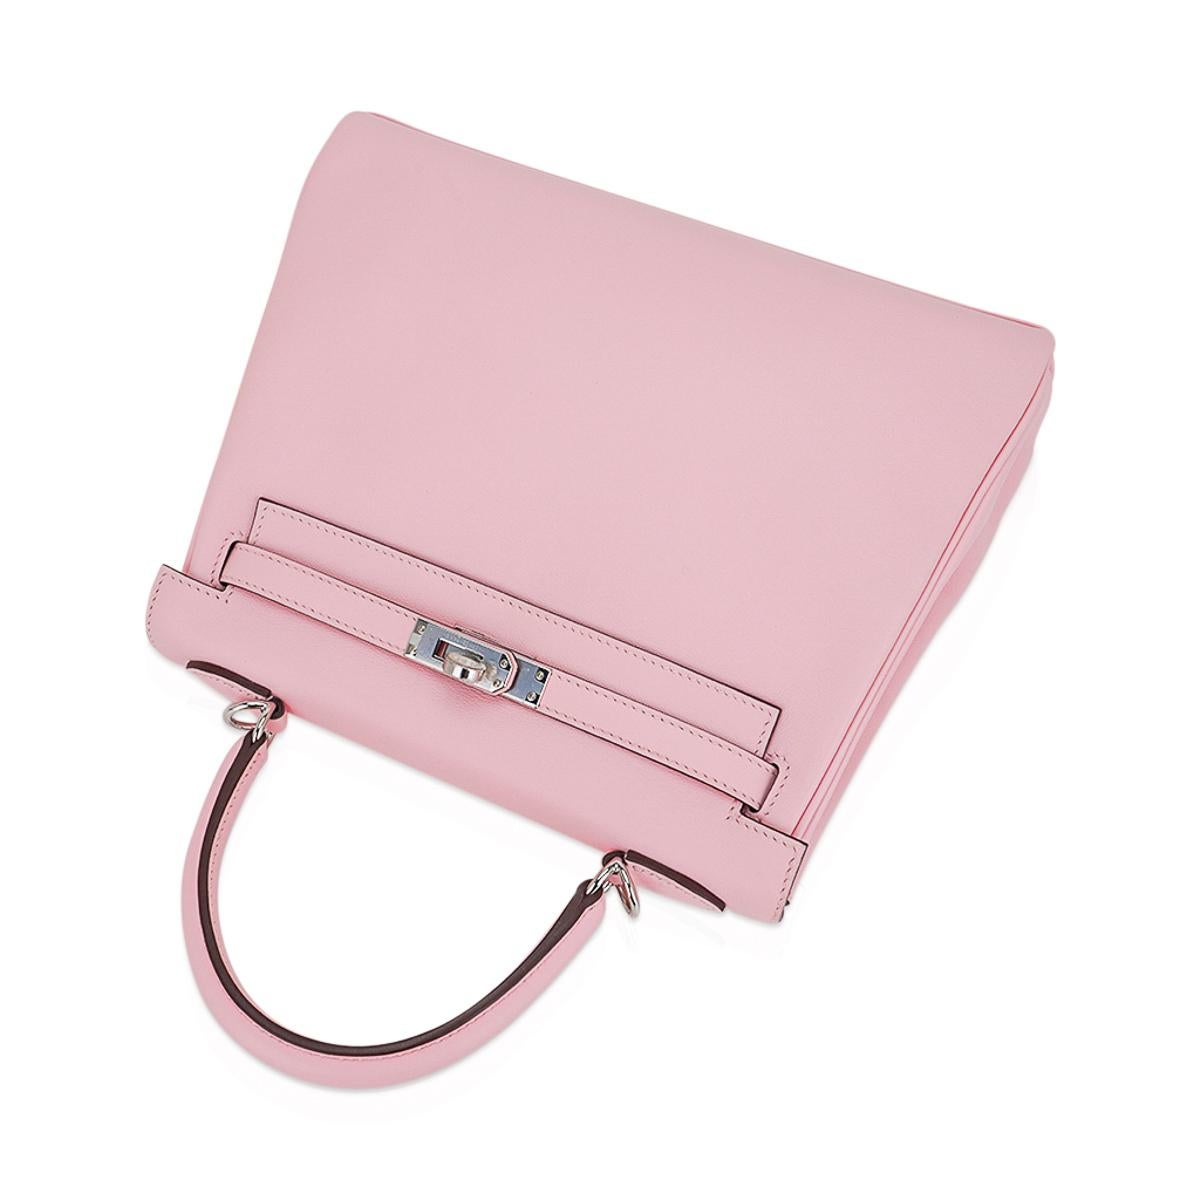 Hermes Kelly 25 Bag Rose Sakura Palladium Hardware Swift Leather In New Condition For Sale In Miami, FL